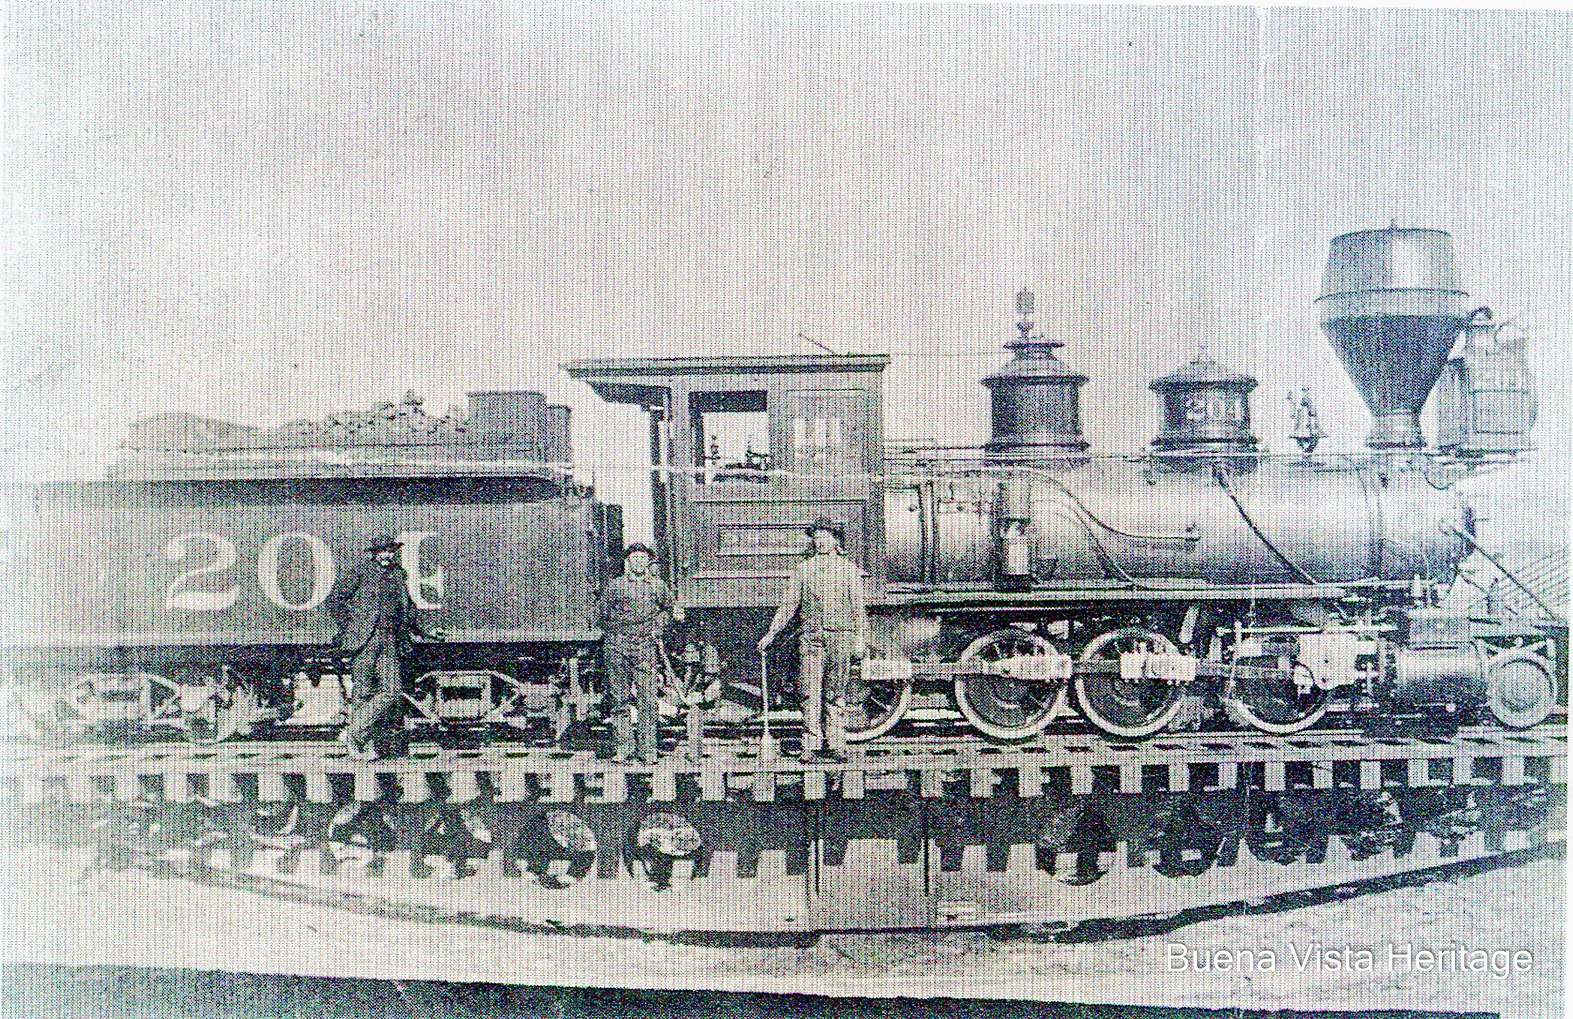 Here is a image of 1886 of what I think is the original Leadville turntable.